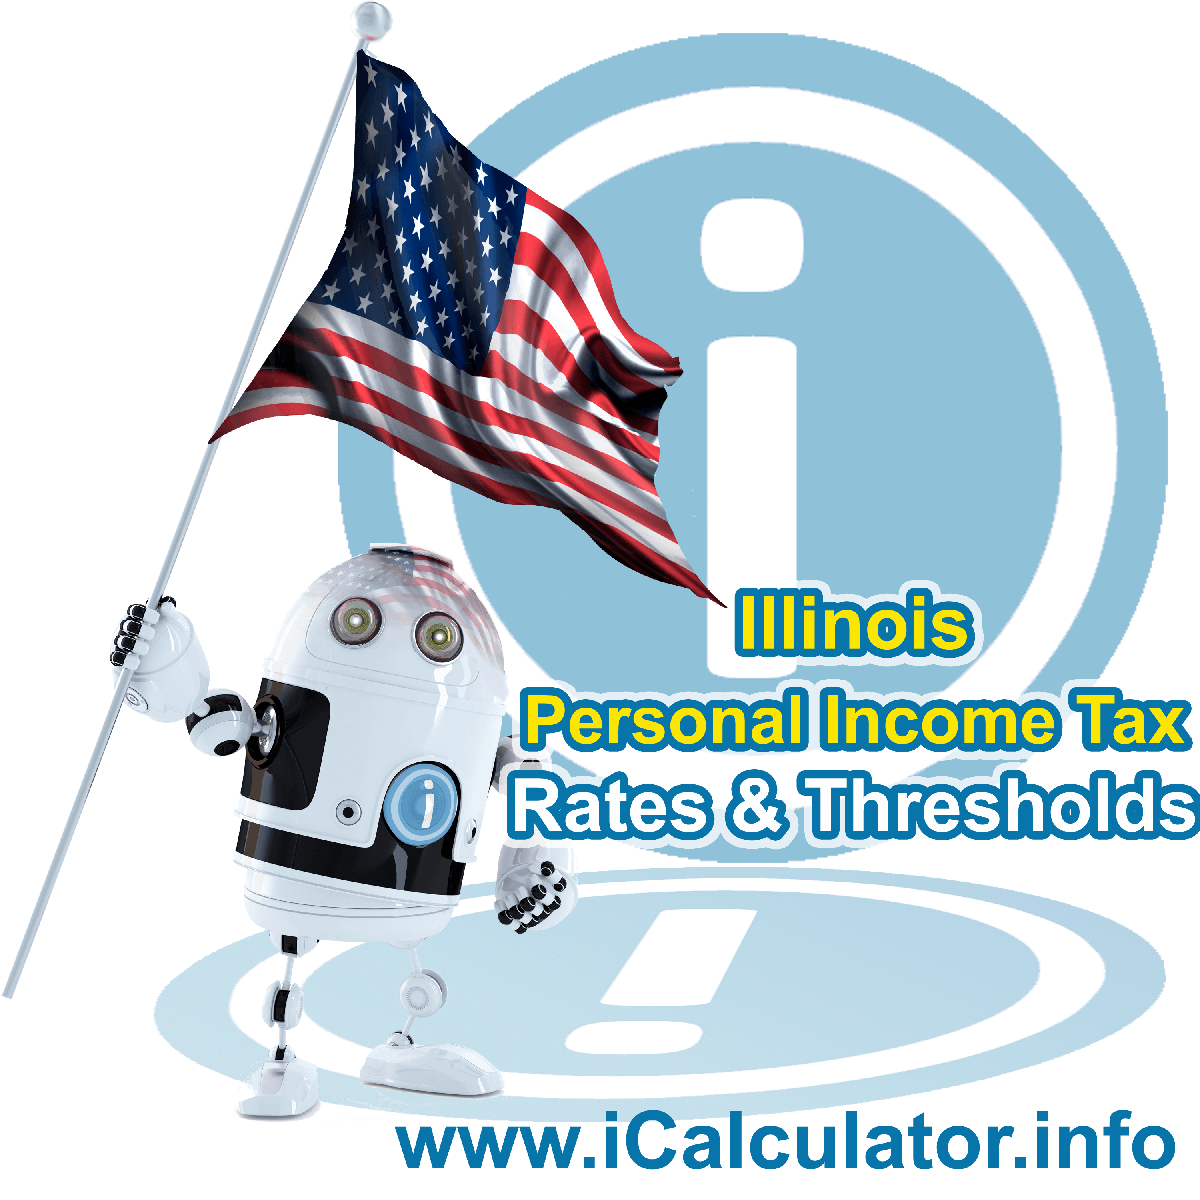 Illinois State Tax Tables 2018. This image displays details of the Illinois State Tax Tables for the 2018 tax return year which is provided in support of the 2018 US Tax Calculator